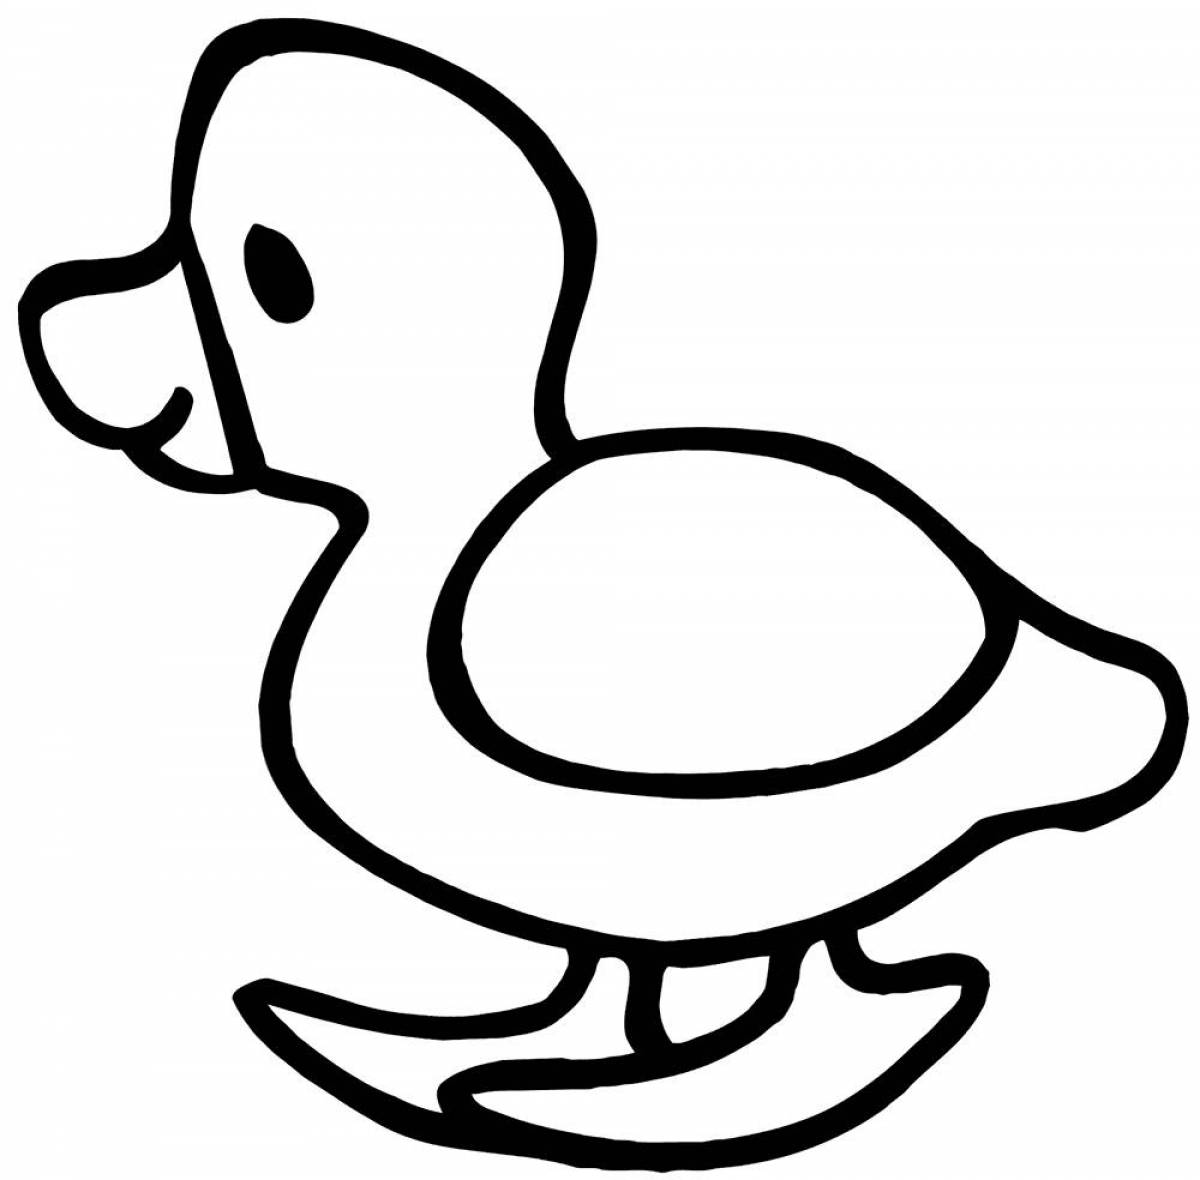 Glamorous duckling coloring page for kids